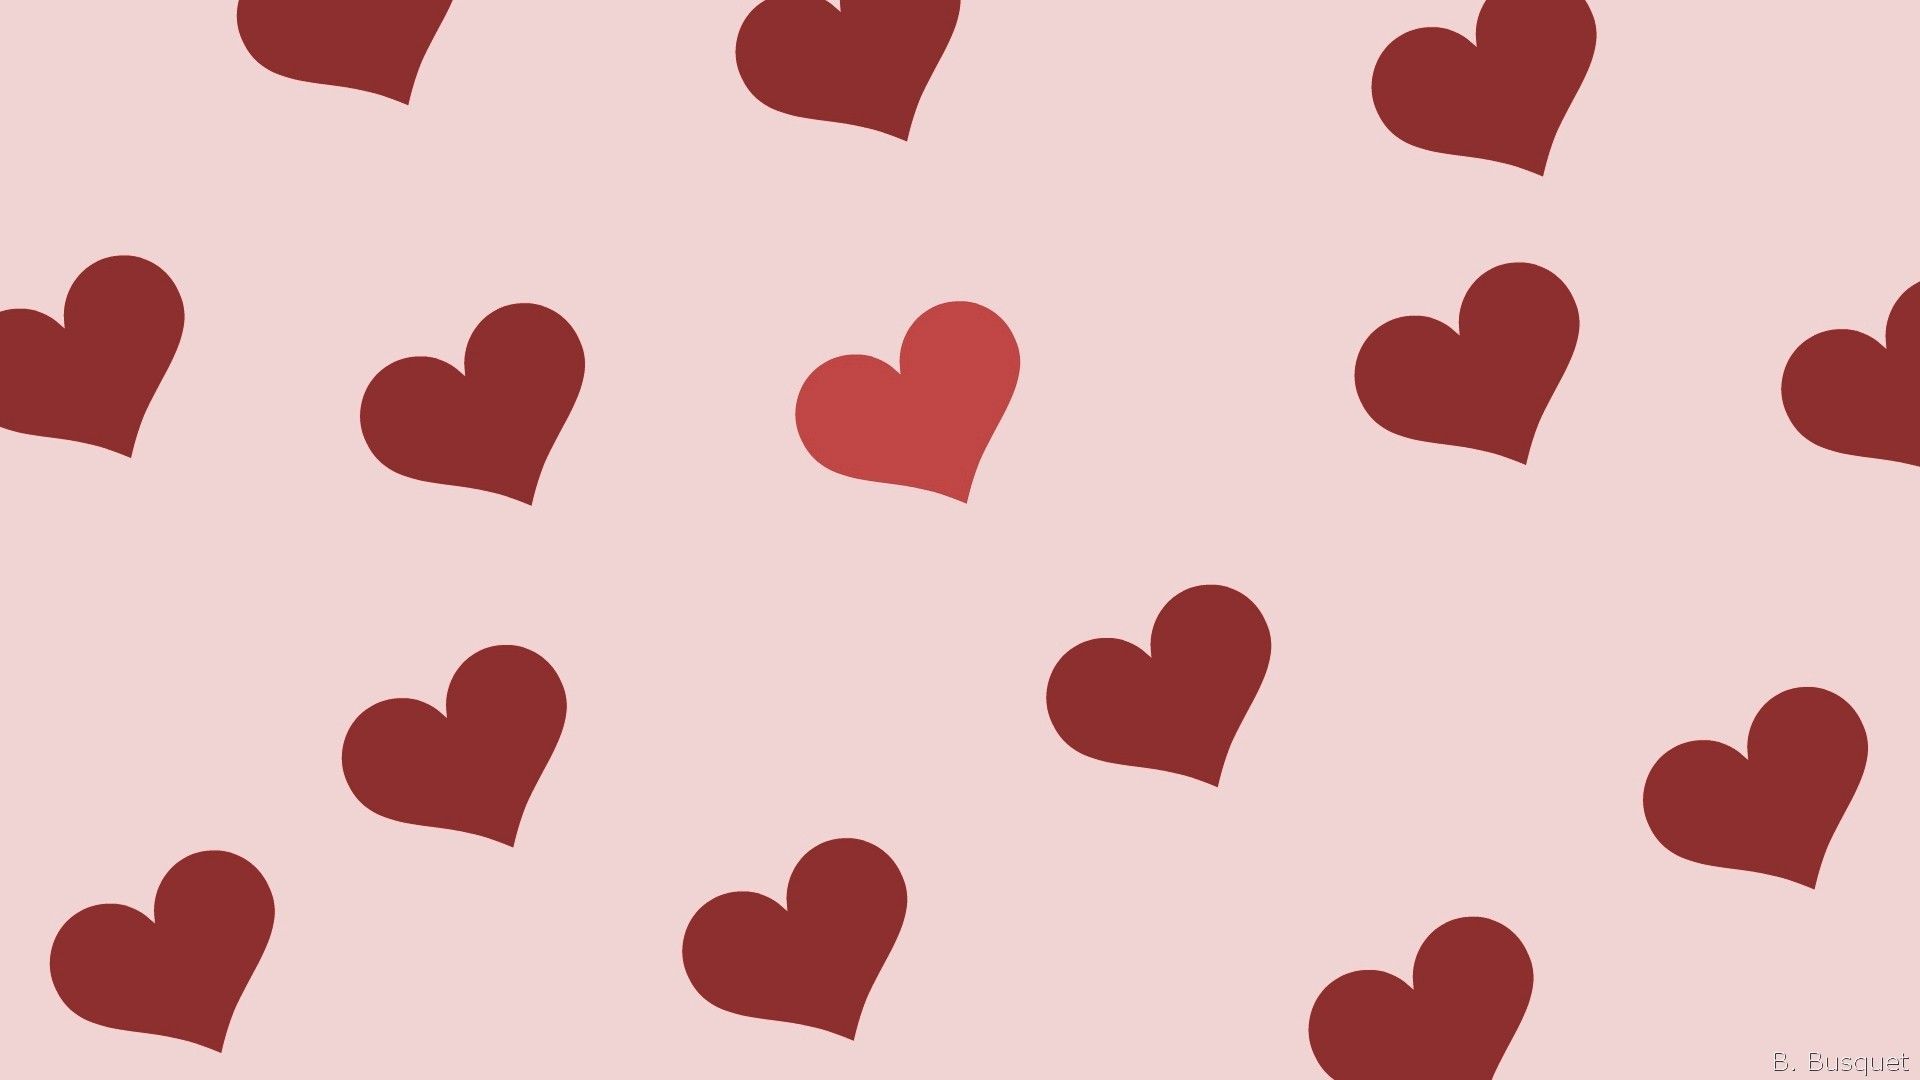 A pattern of red hearts on pink background - Pink heart